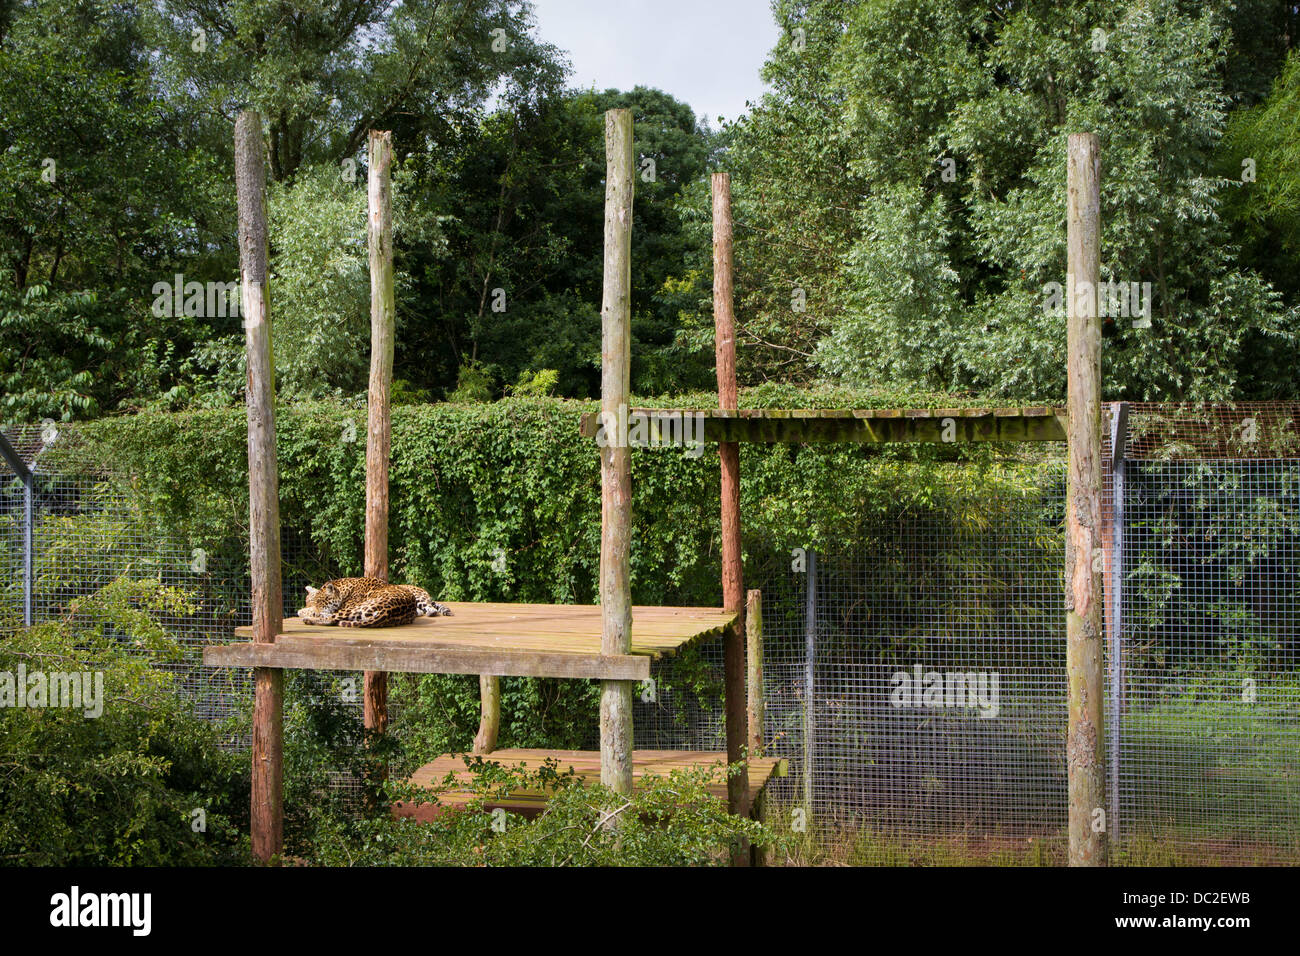 The Amur Tiger asleep in its enclosure in captivity at South Lakes Wild Animal Park, Cumbria. Stock Photo